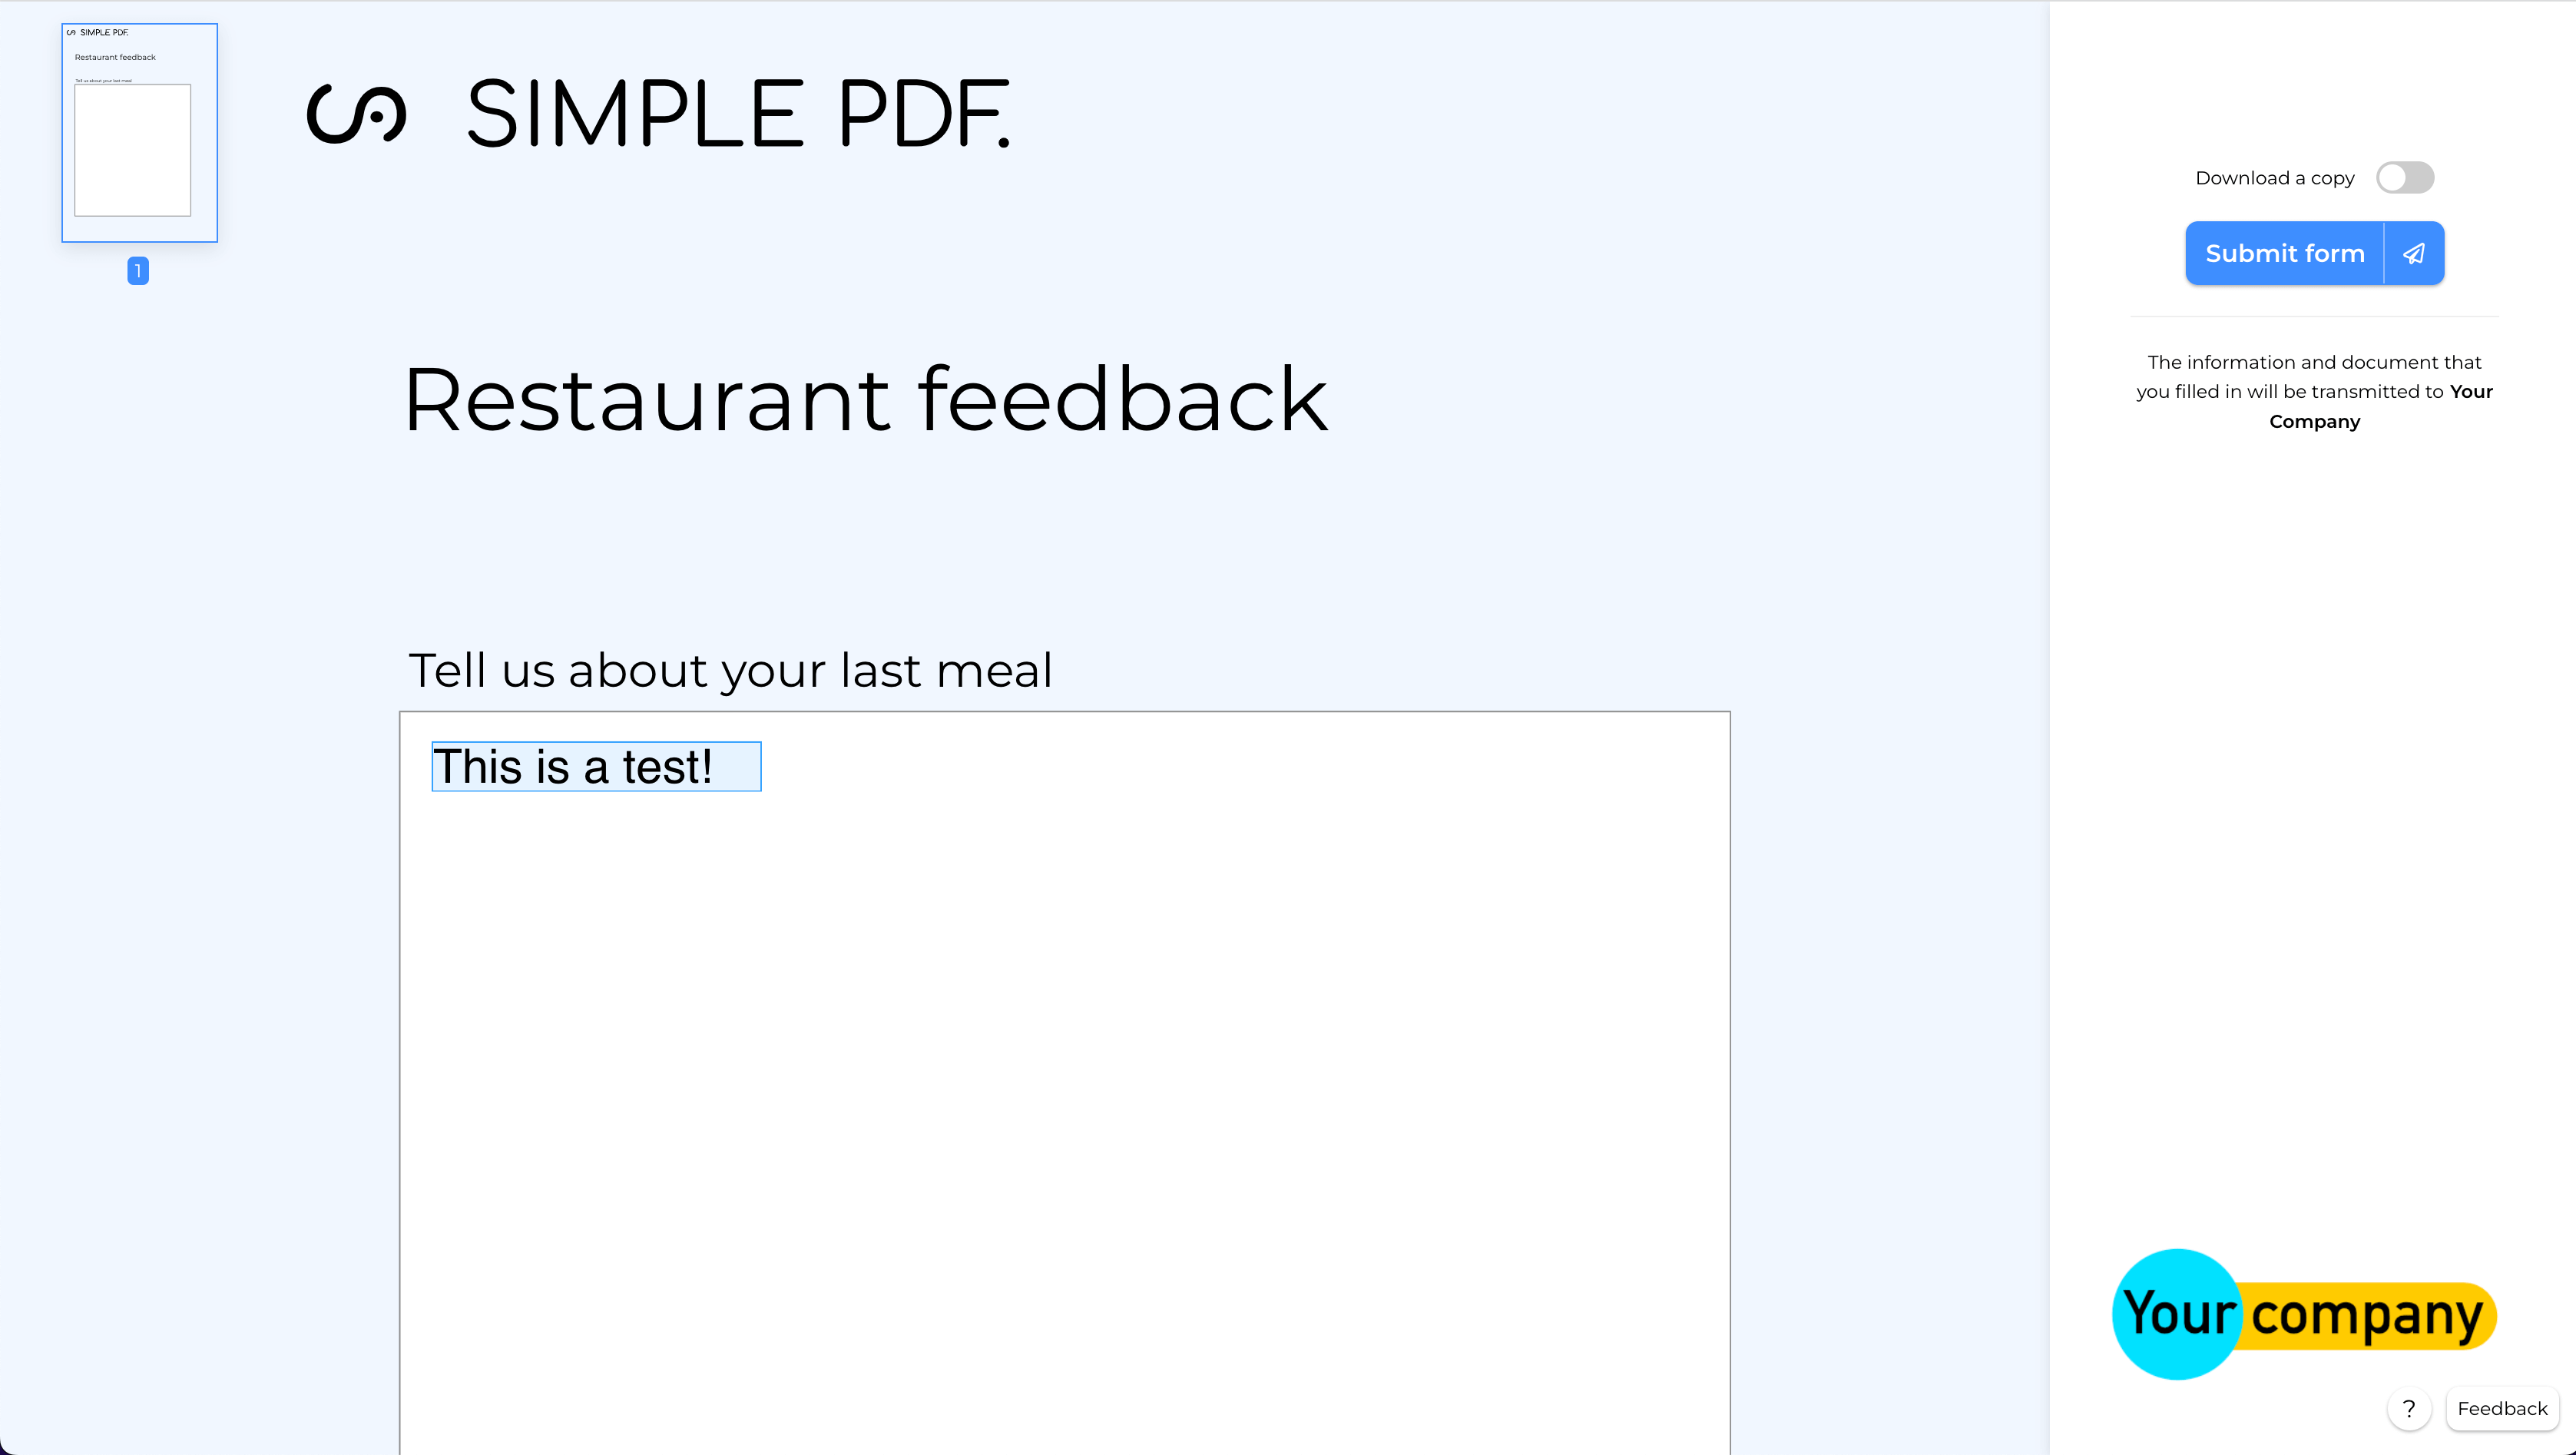 Testing the flow by submitting a form